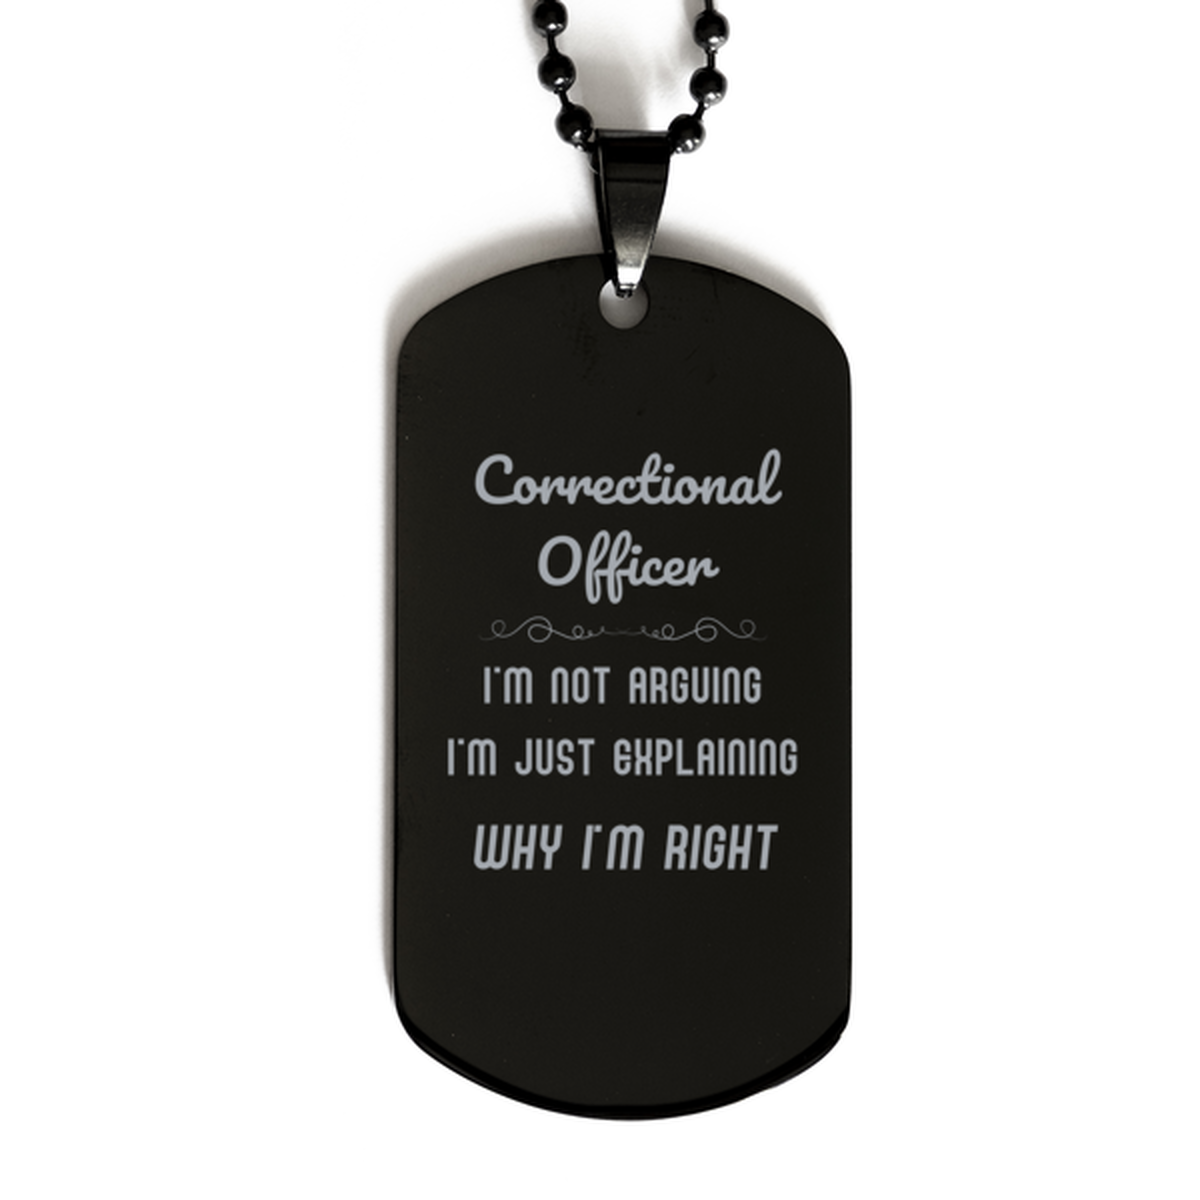 Correctional Officer I'm not Arguing. I'm Just Explaining Why I'm RIGHT Black Dog Tag, Funny Saying Quote Correctional Officer Gifts For Correctional Officer Graduation Birthday Christmas Gifts for Men Women Coworker